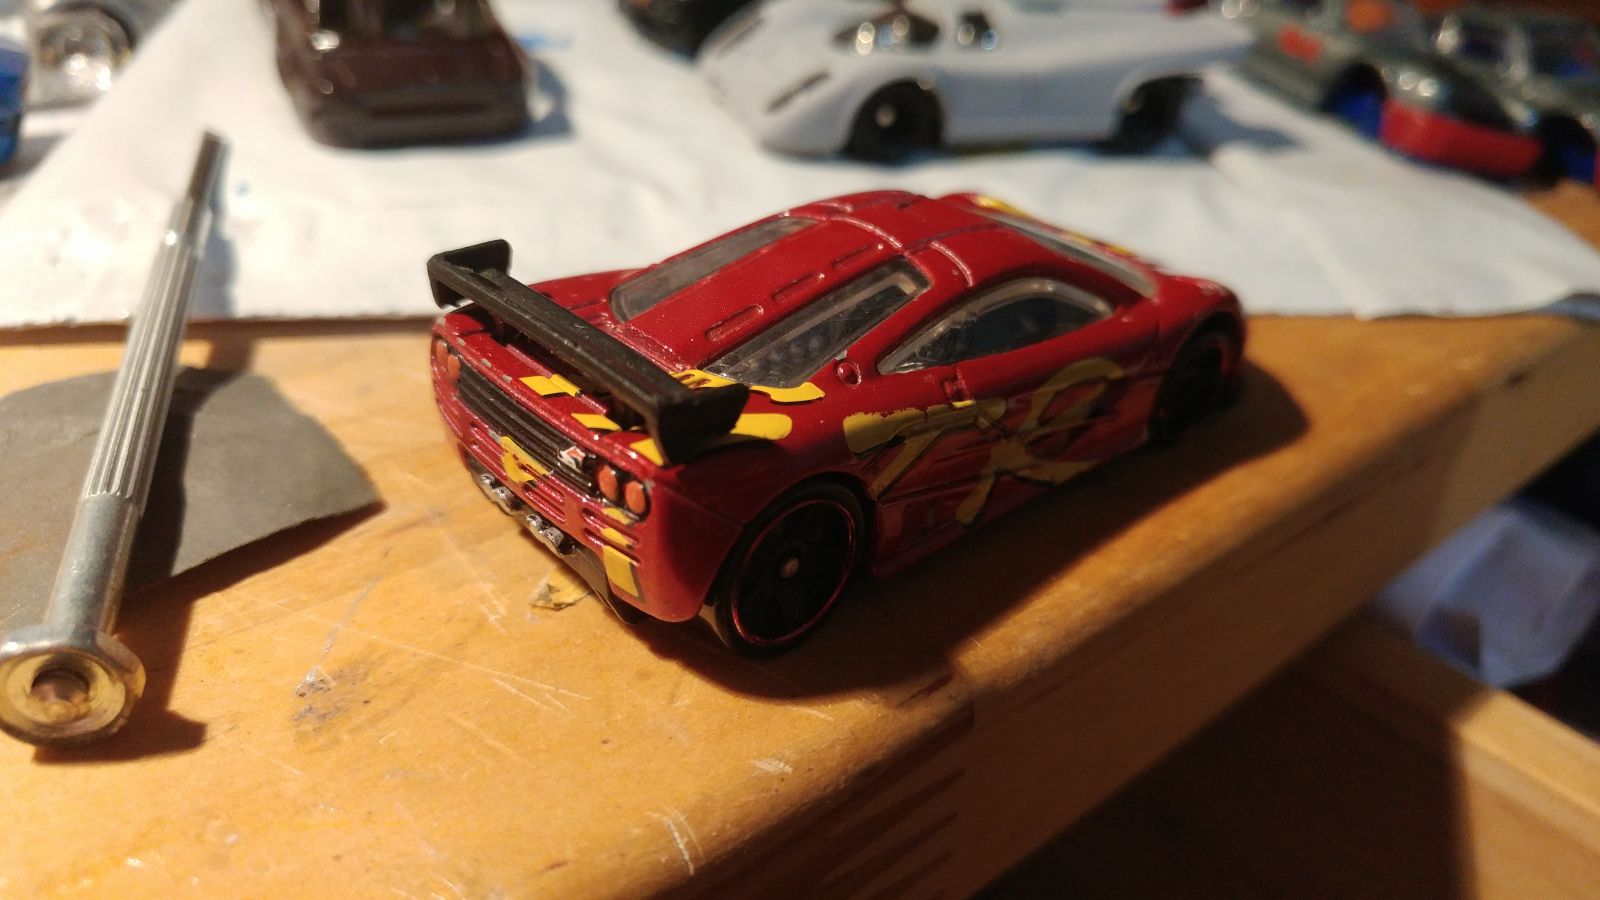 Illustration for article titled Hot Wheels Grail: Acquired! (Also Woking Wednesday)